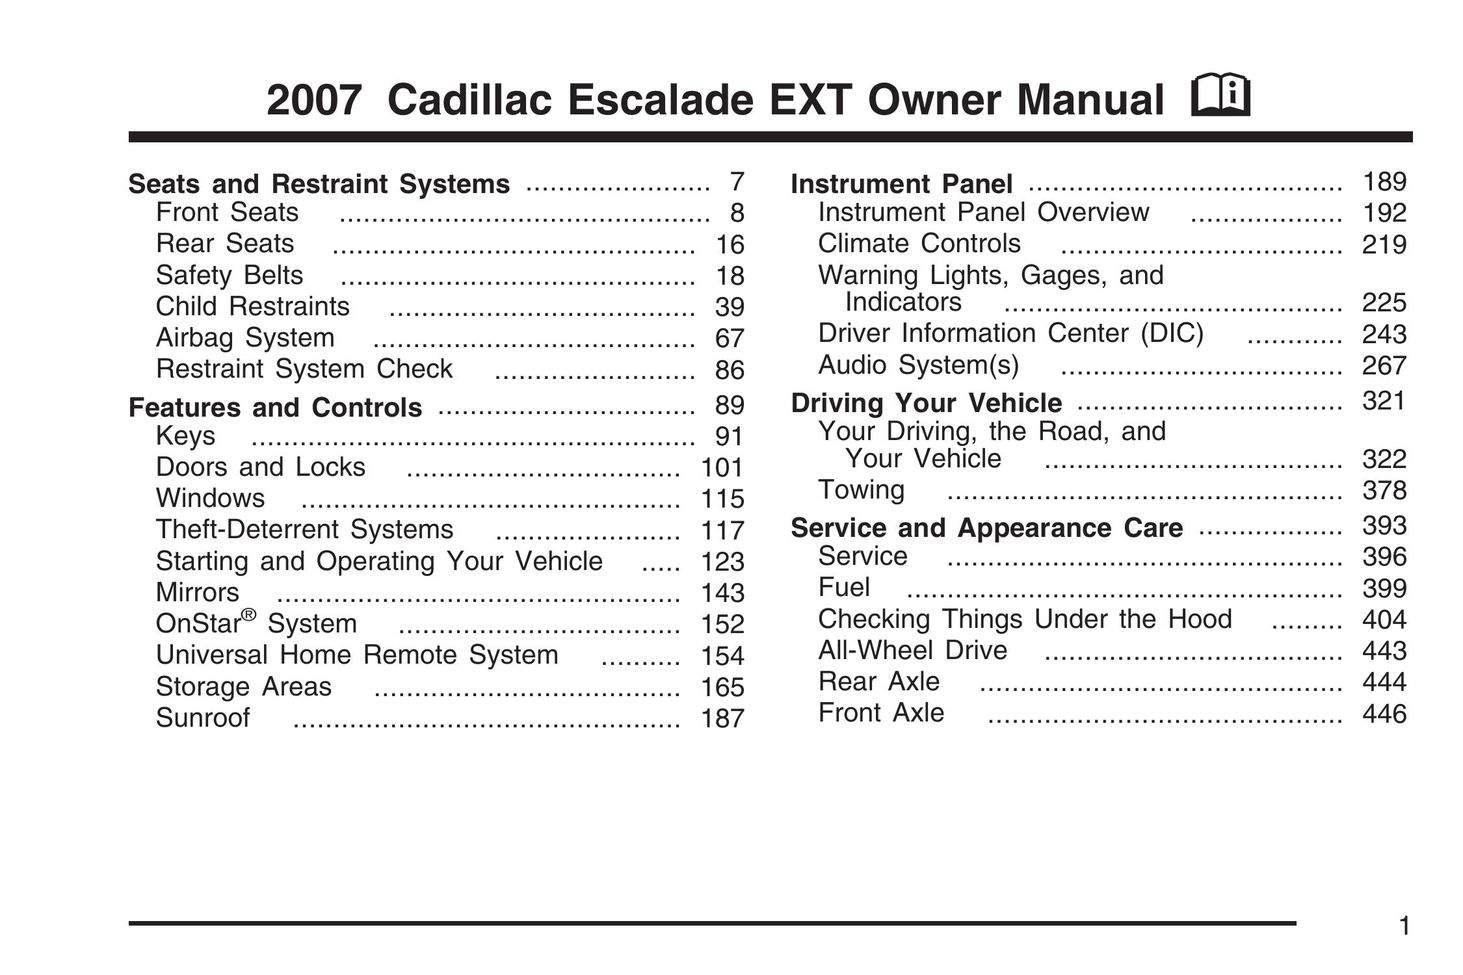 Cadillac 2007 Home Safety Product User Manual